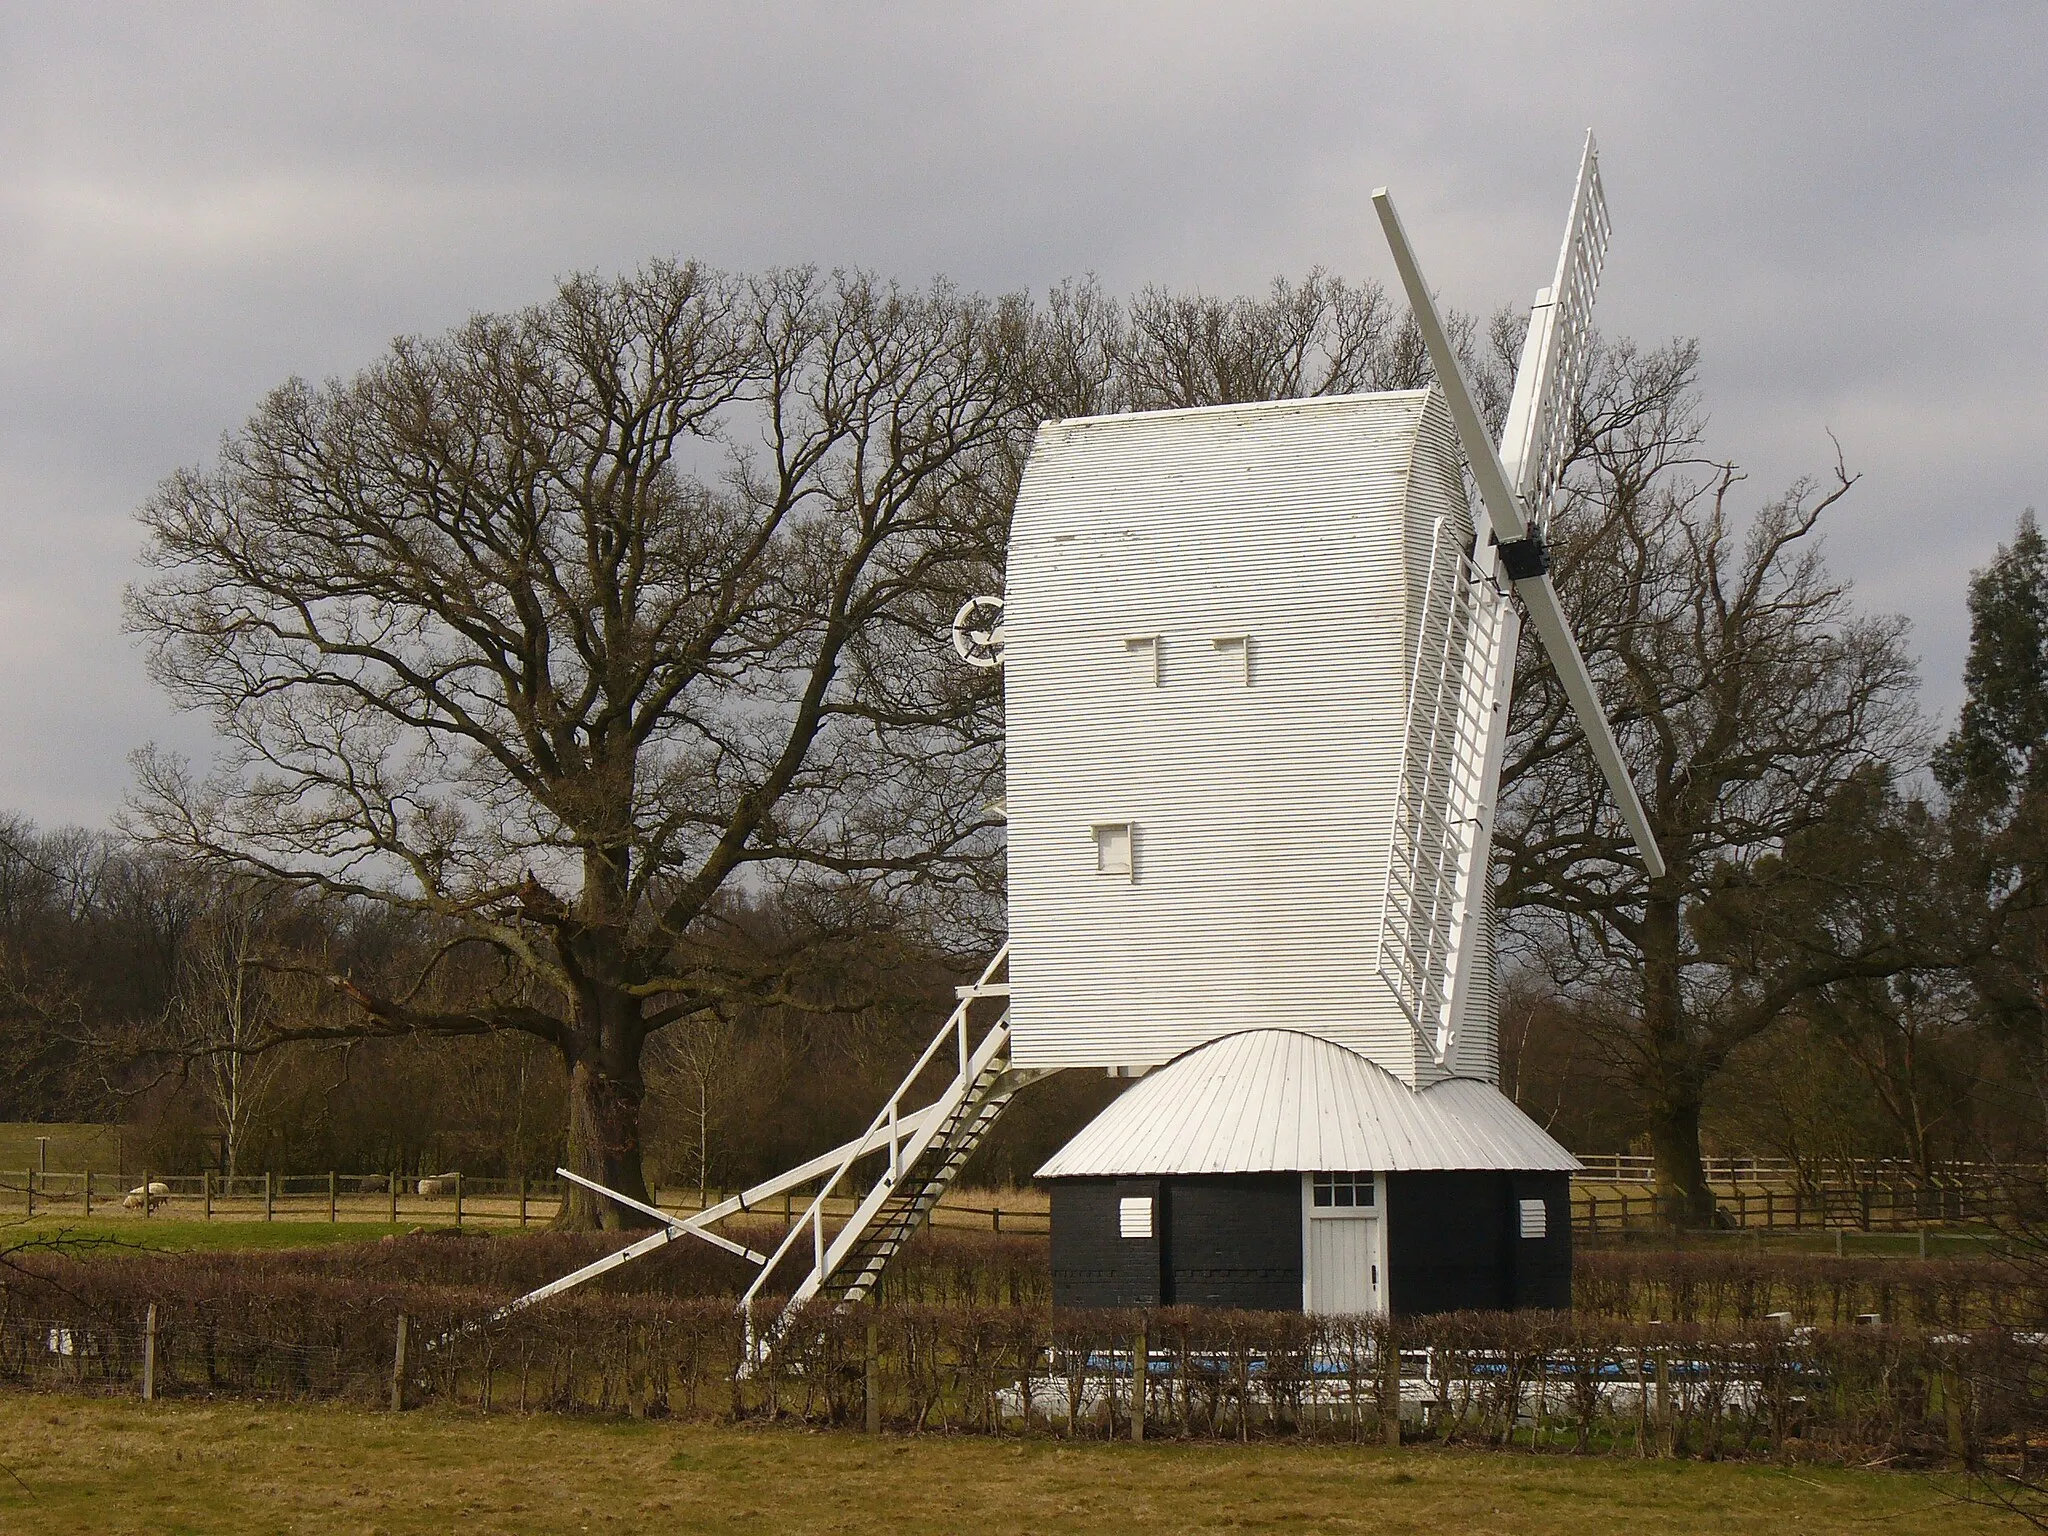 Photo showing: Lowfield Heath Windmill. South-west of Charlwood is this picturesque post-mill which was restored in 1990. It is open to visitors in the summer months.
http://www.ockleywindmill.co.uk/lowfieldheathwindmill.htm